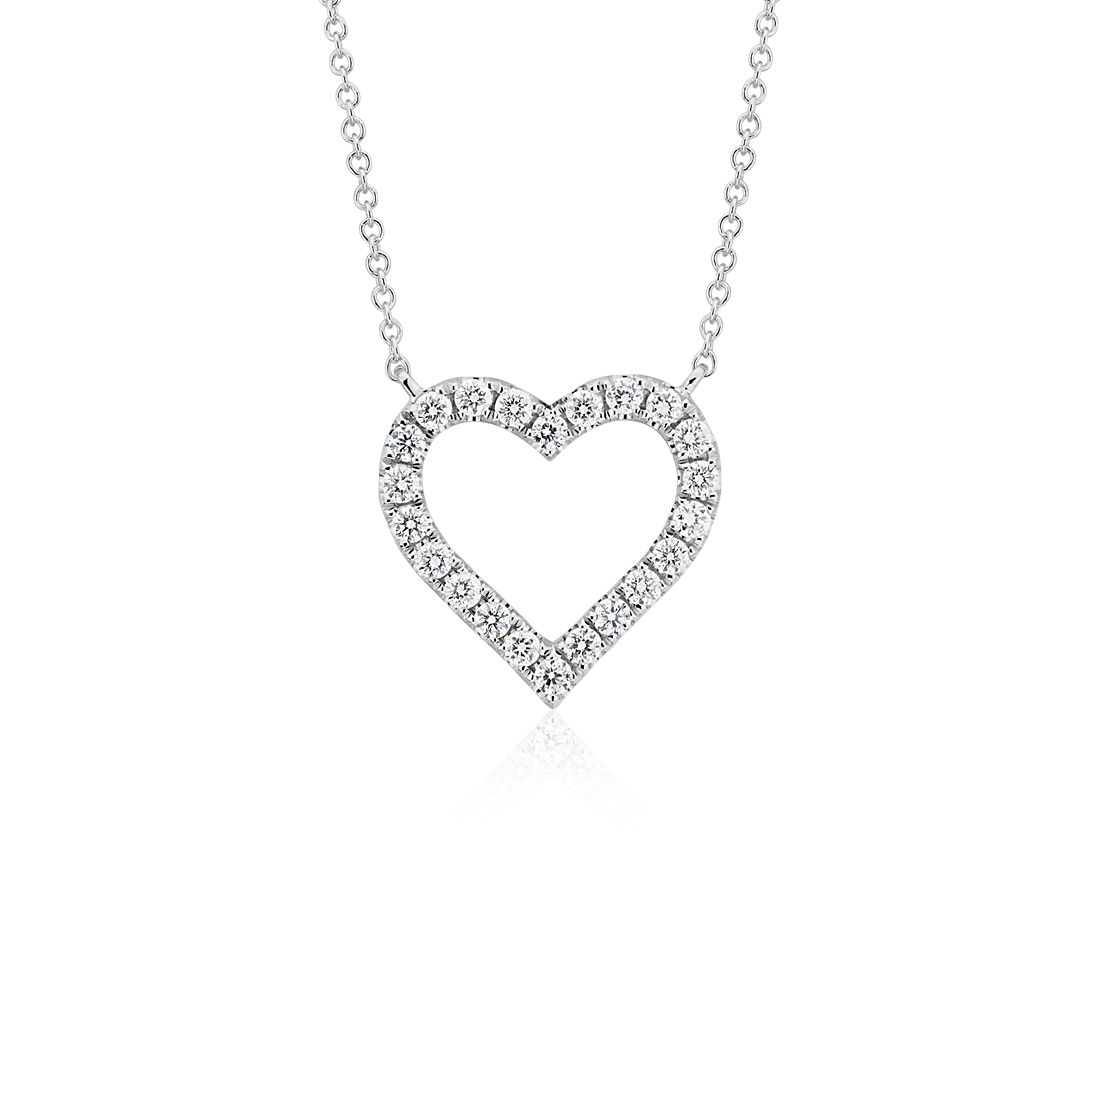 Diamond Heart Necklace in 14k White Gold (0.48 ct. tw.)